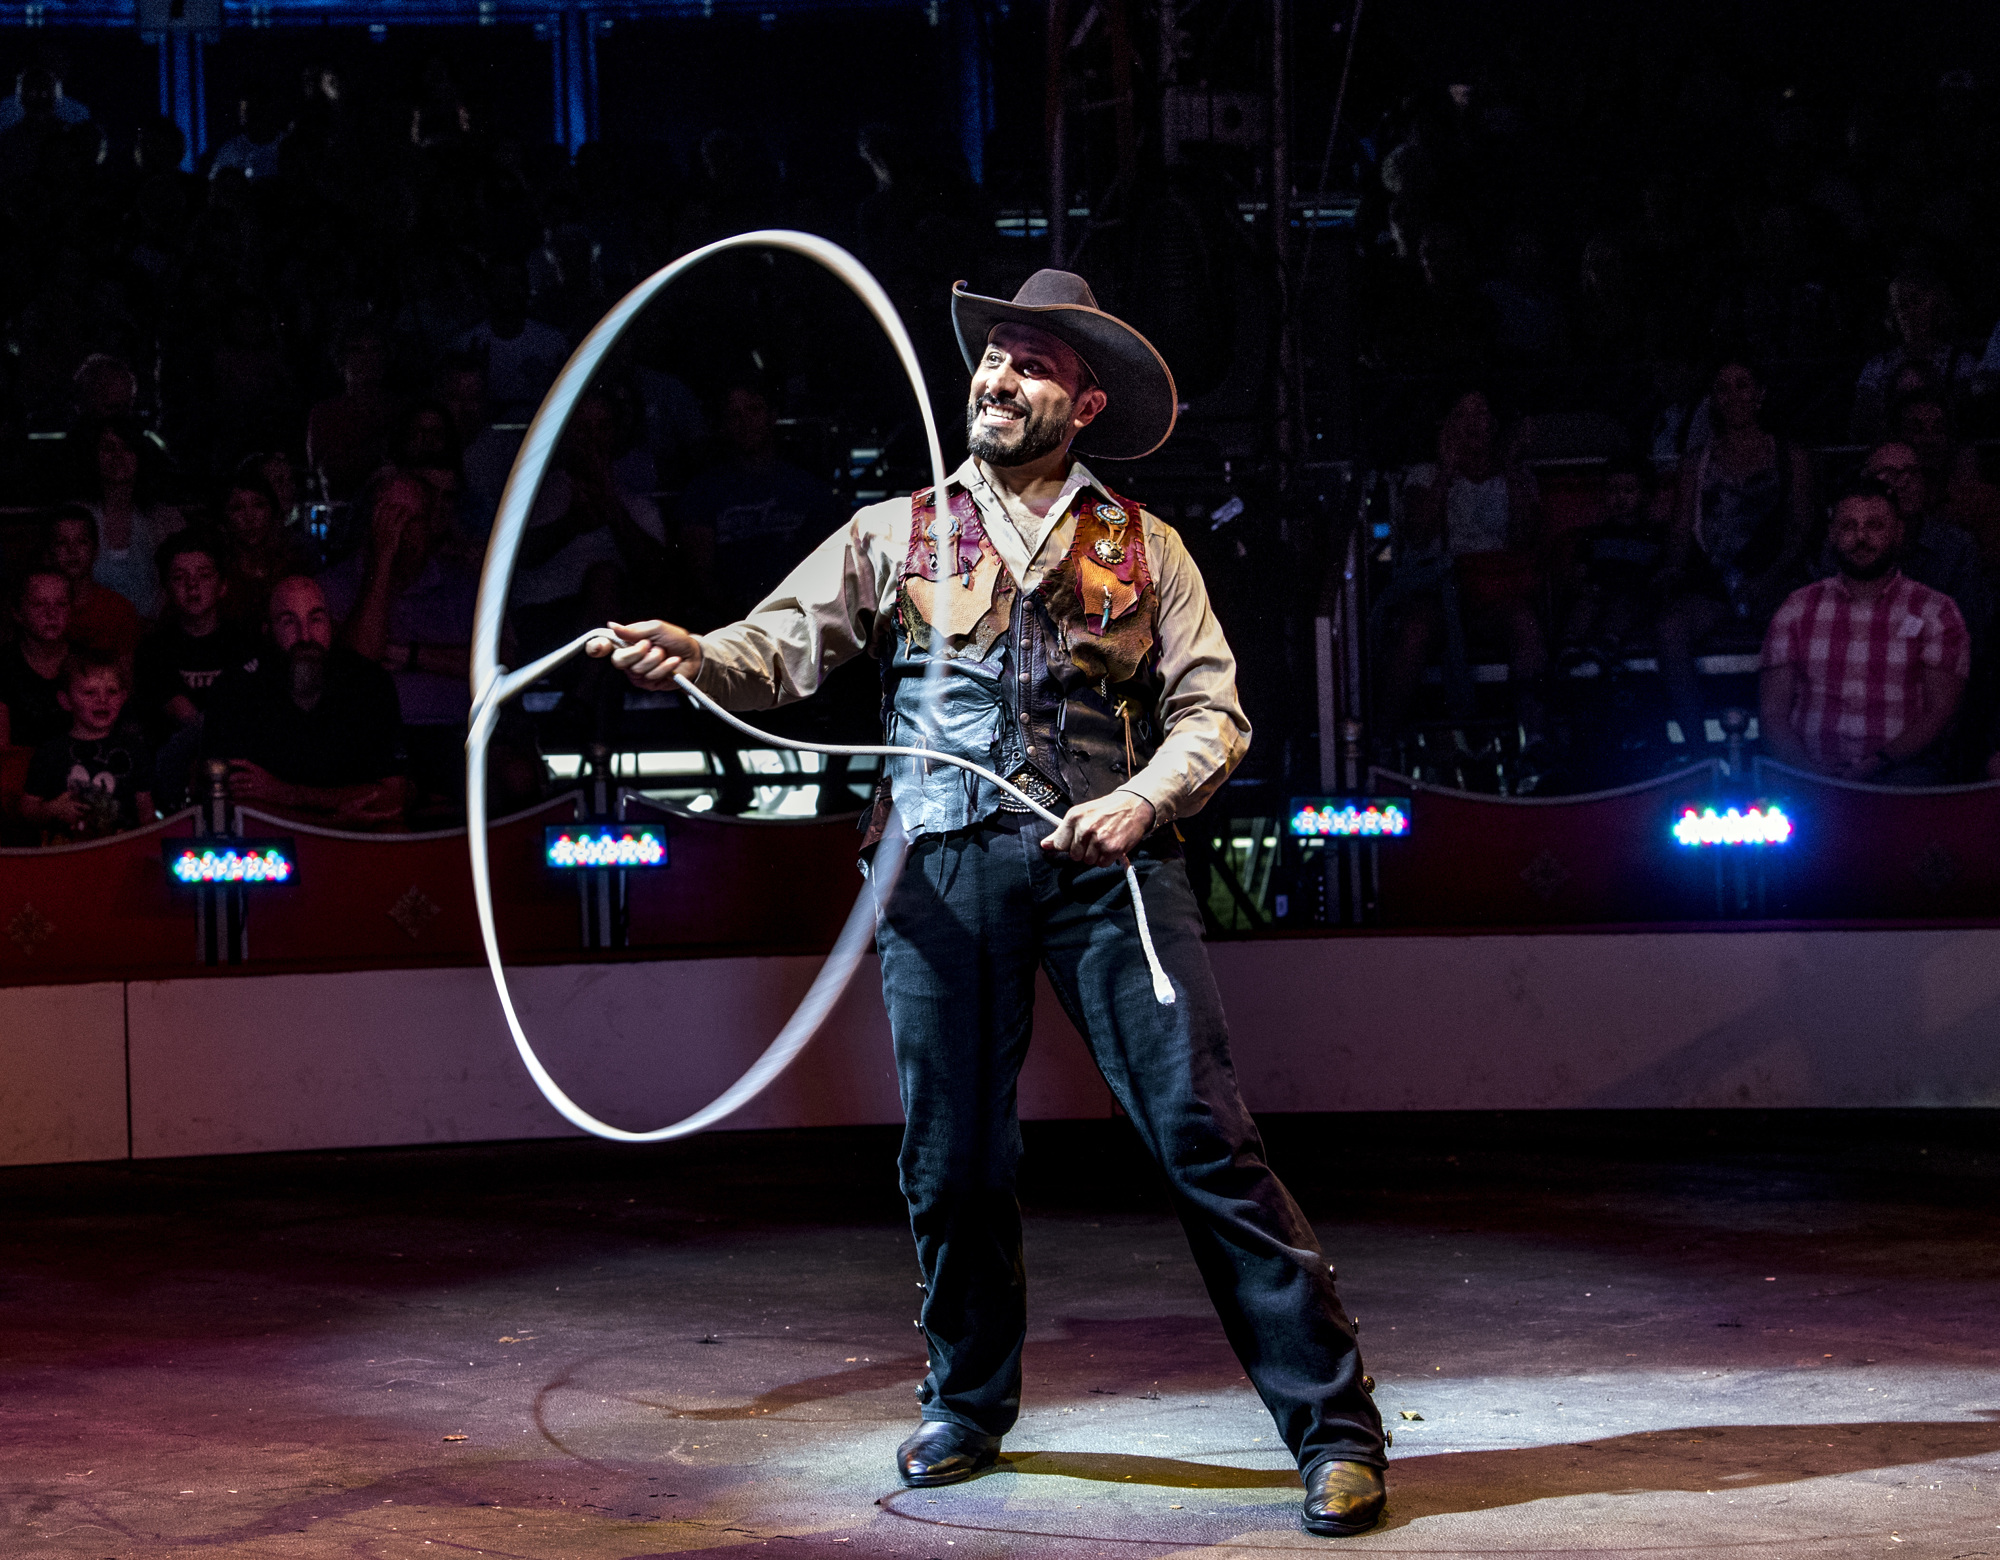 AJ Silver never thought he would end up in the circus, but after seeing a rodeo at Madison Square Garden as a child, he was forever entranced by lassoing. Photo by Cliff Roles